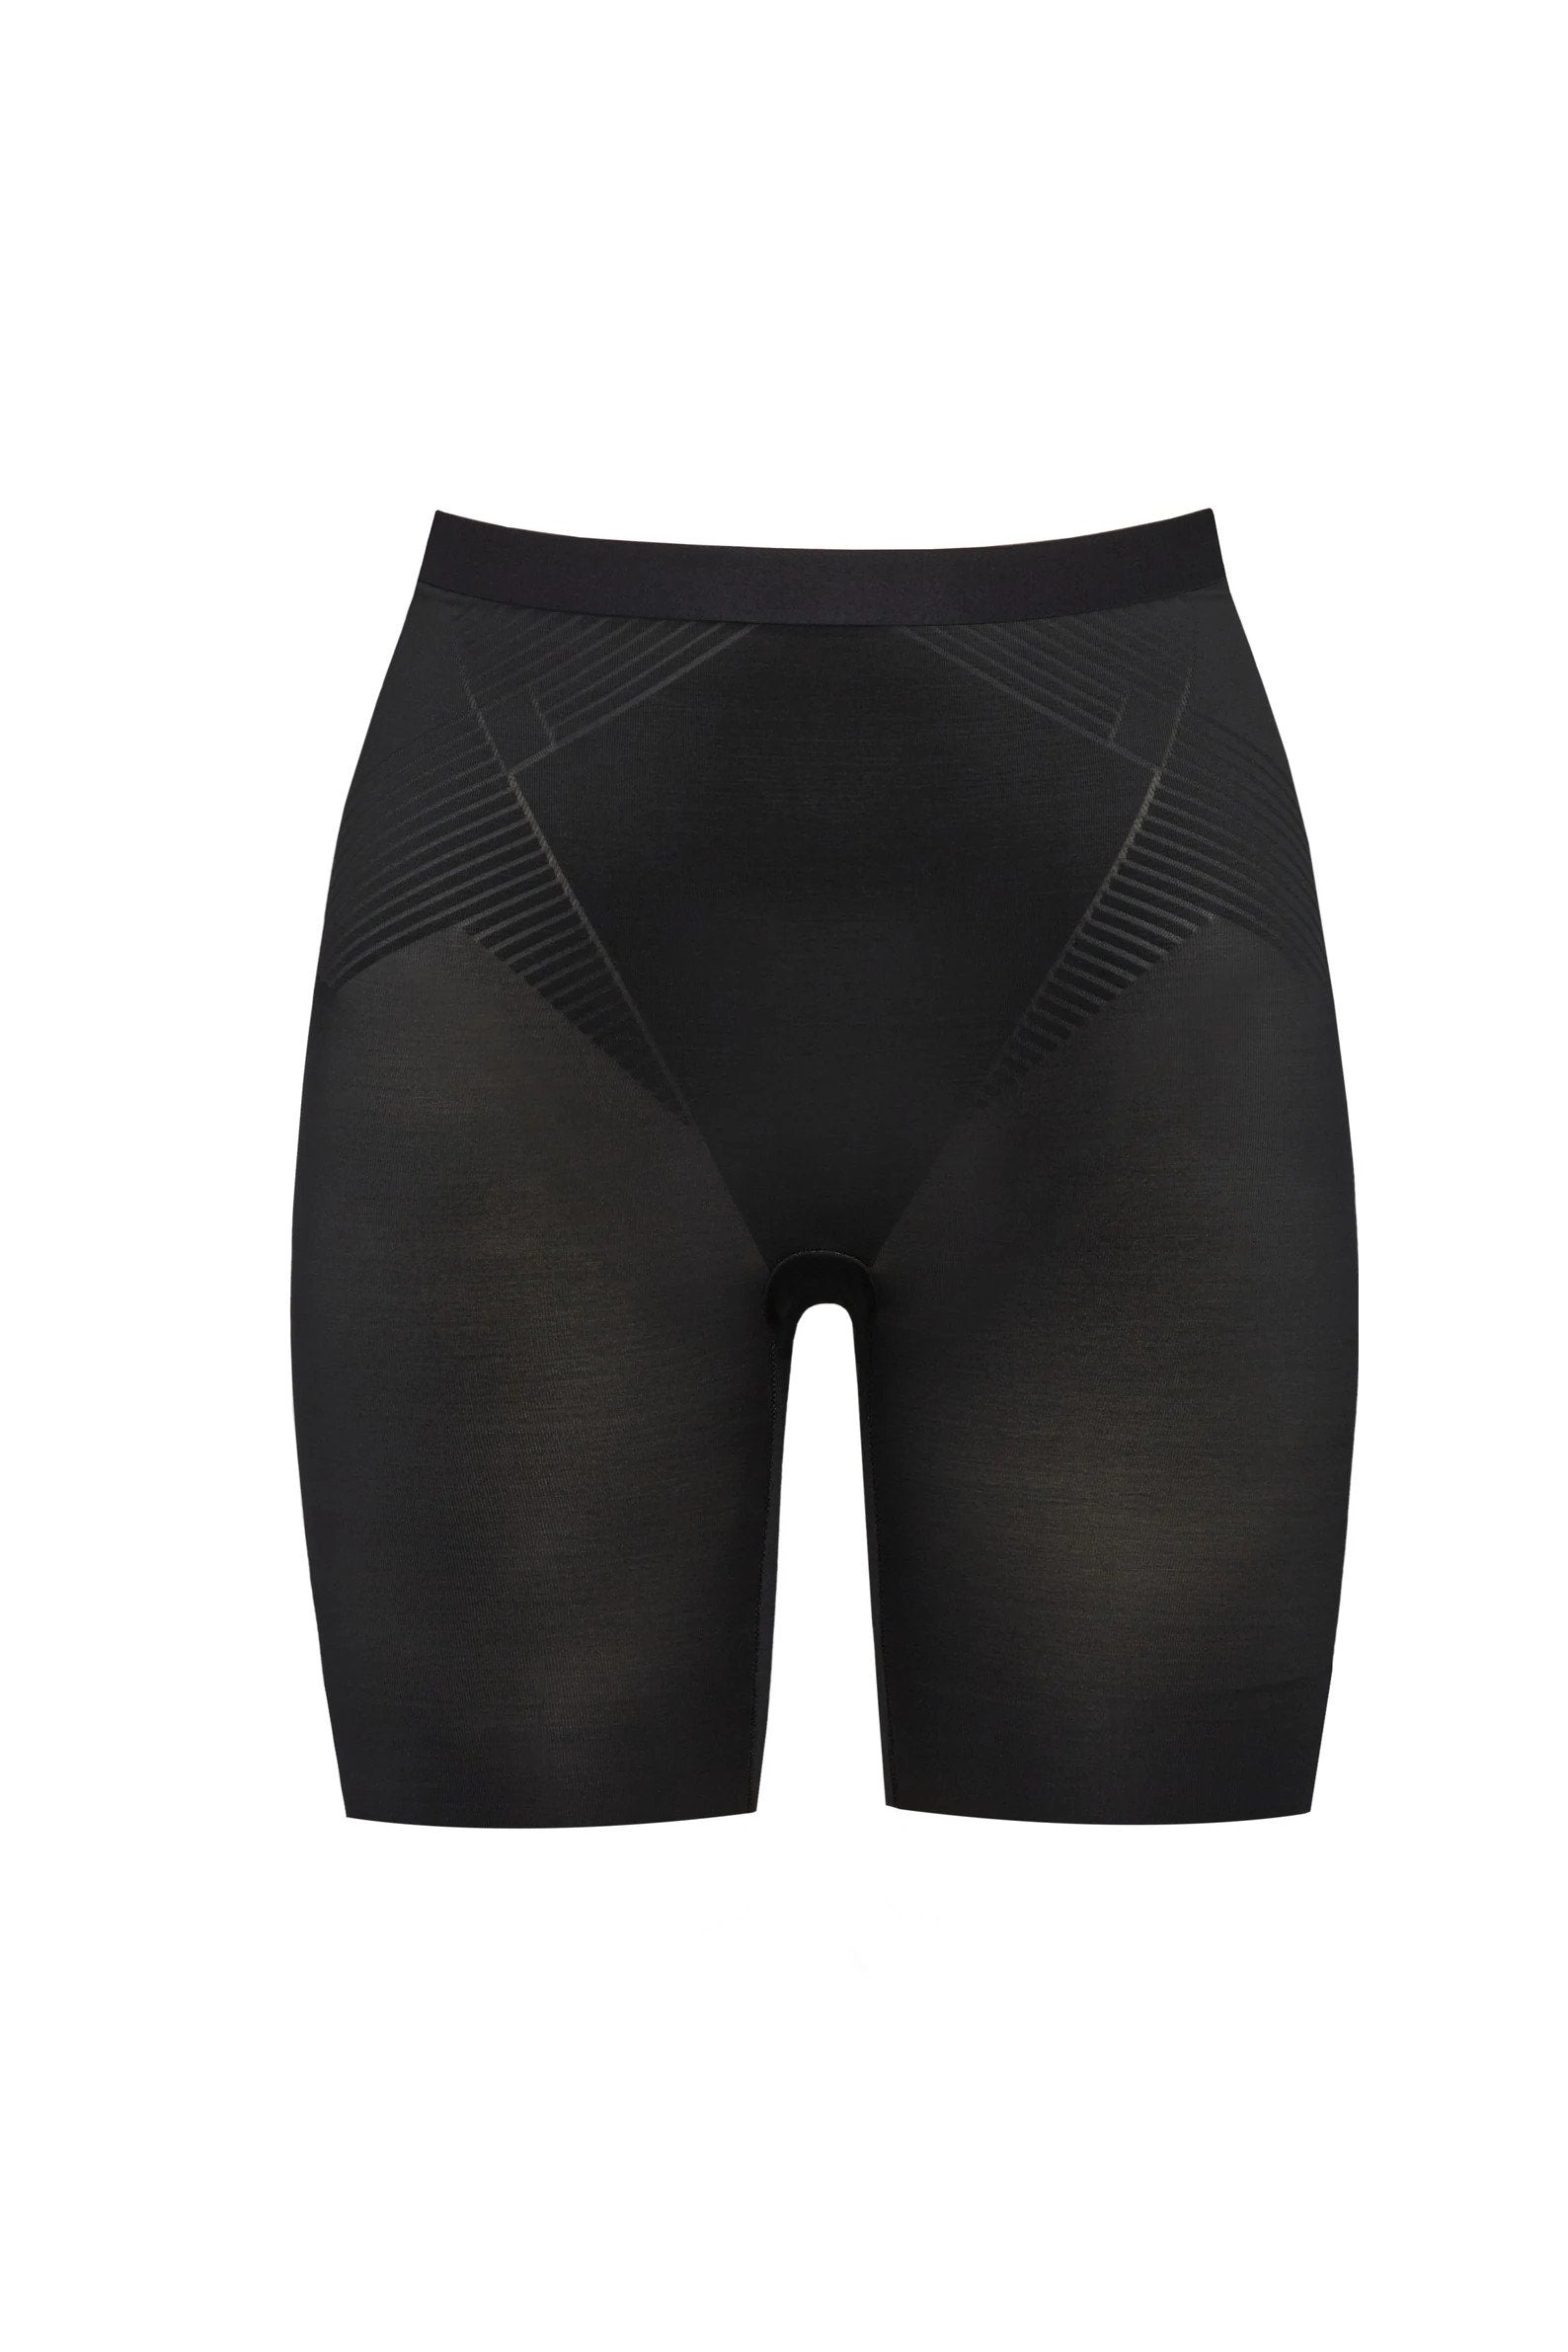 THINSTINCTS 2.0 Mid-Thigh Shorts in Very Black – Christina's Luxuries